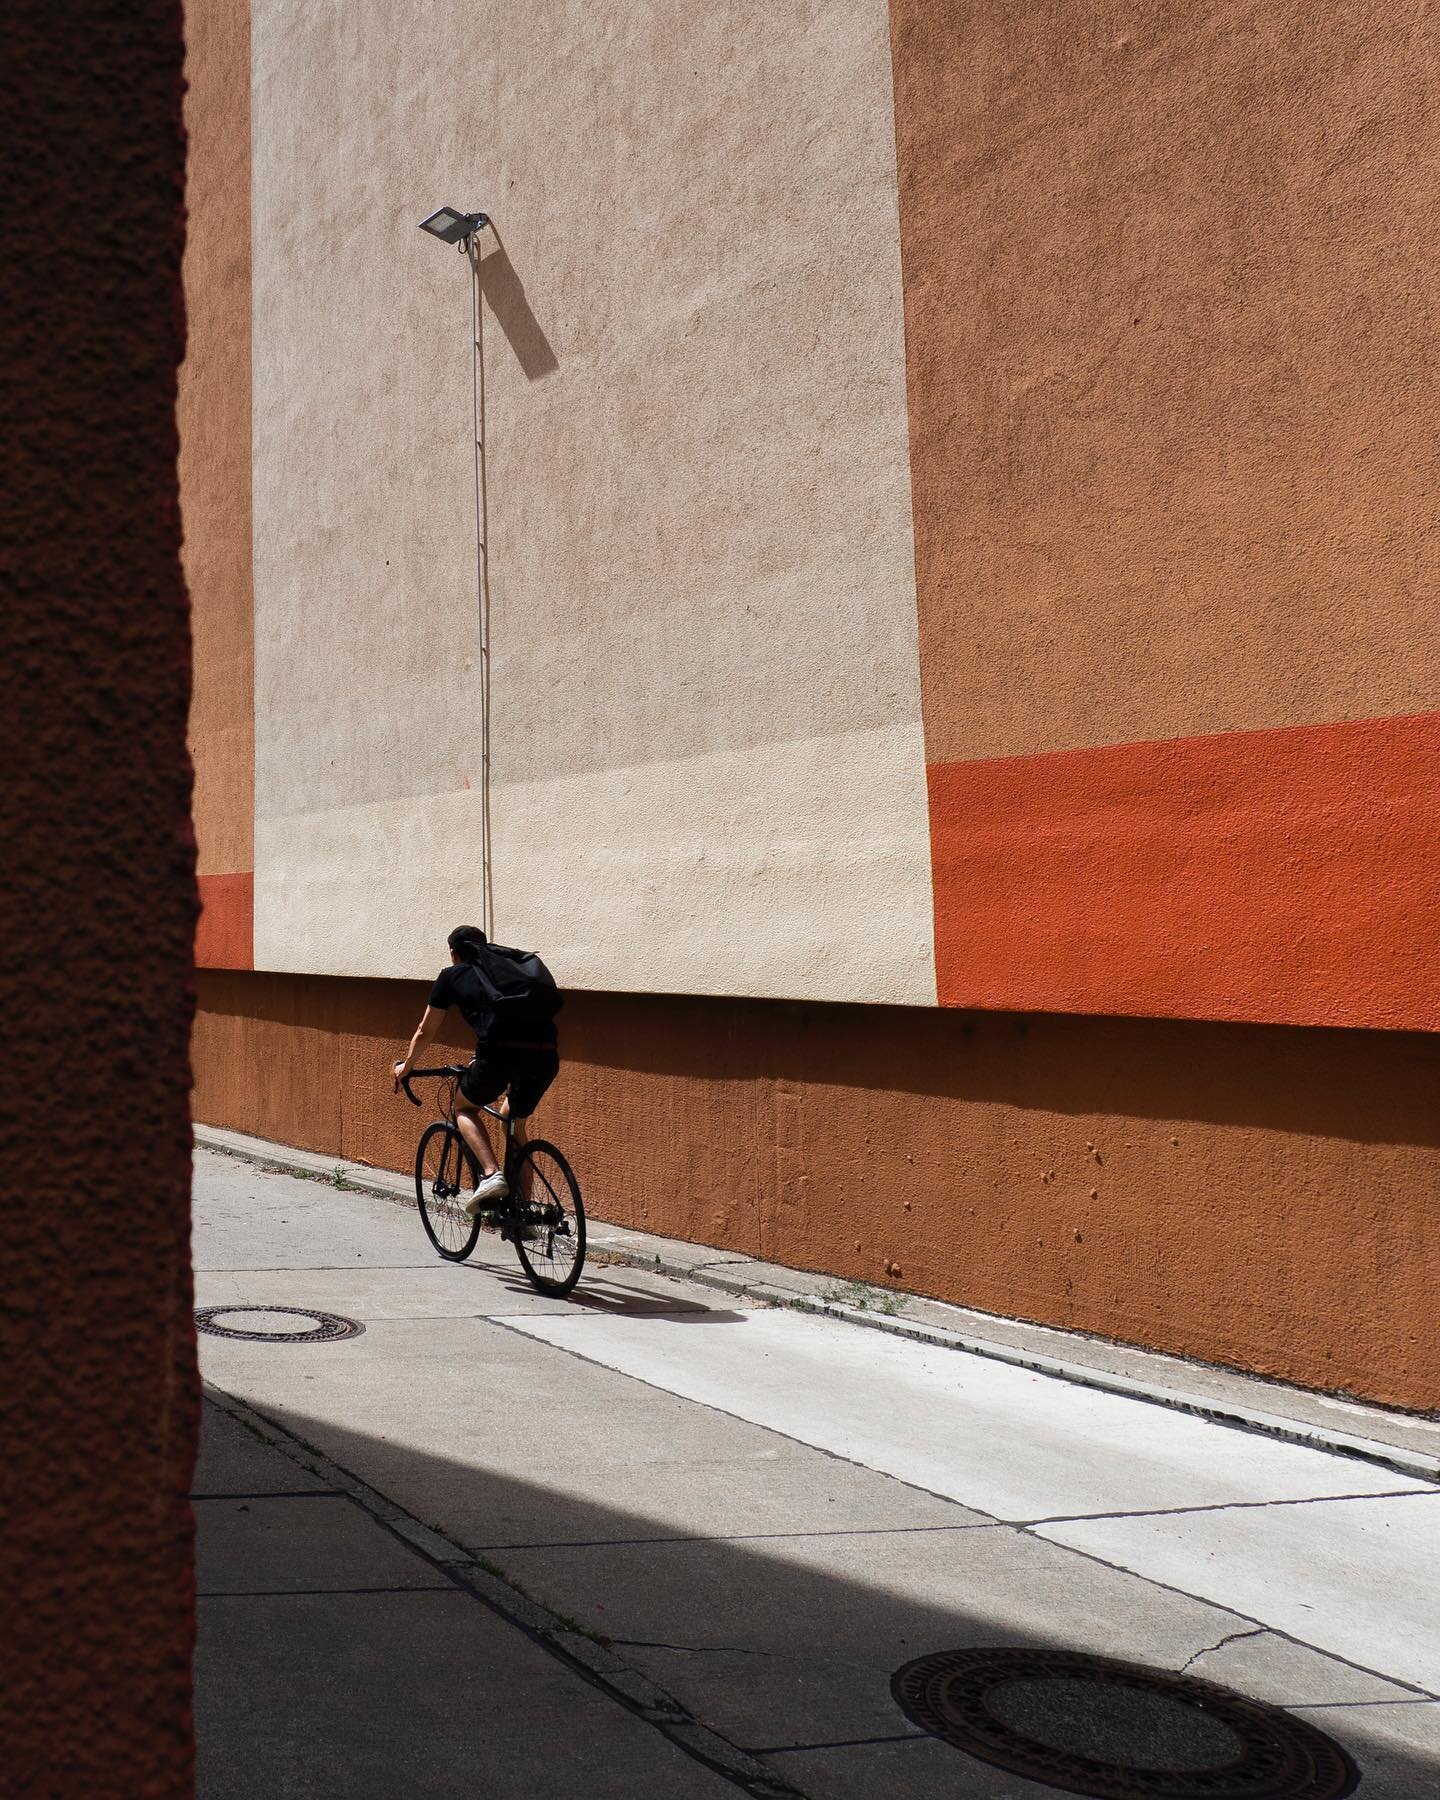 chasing light with our bicycles.